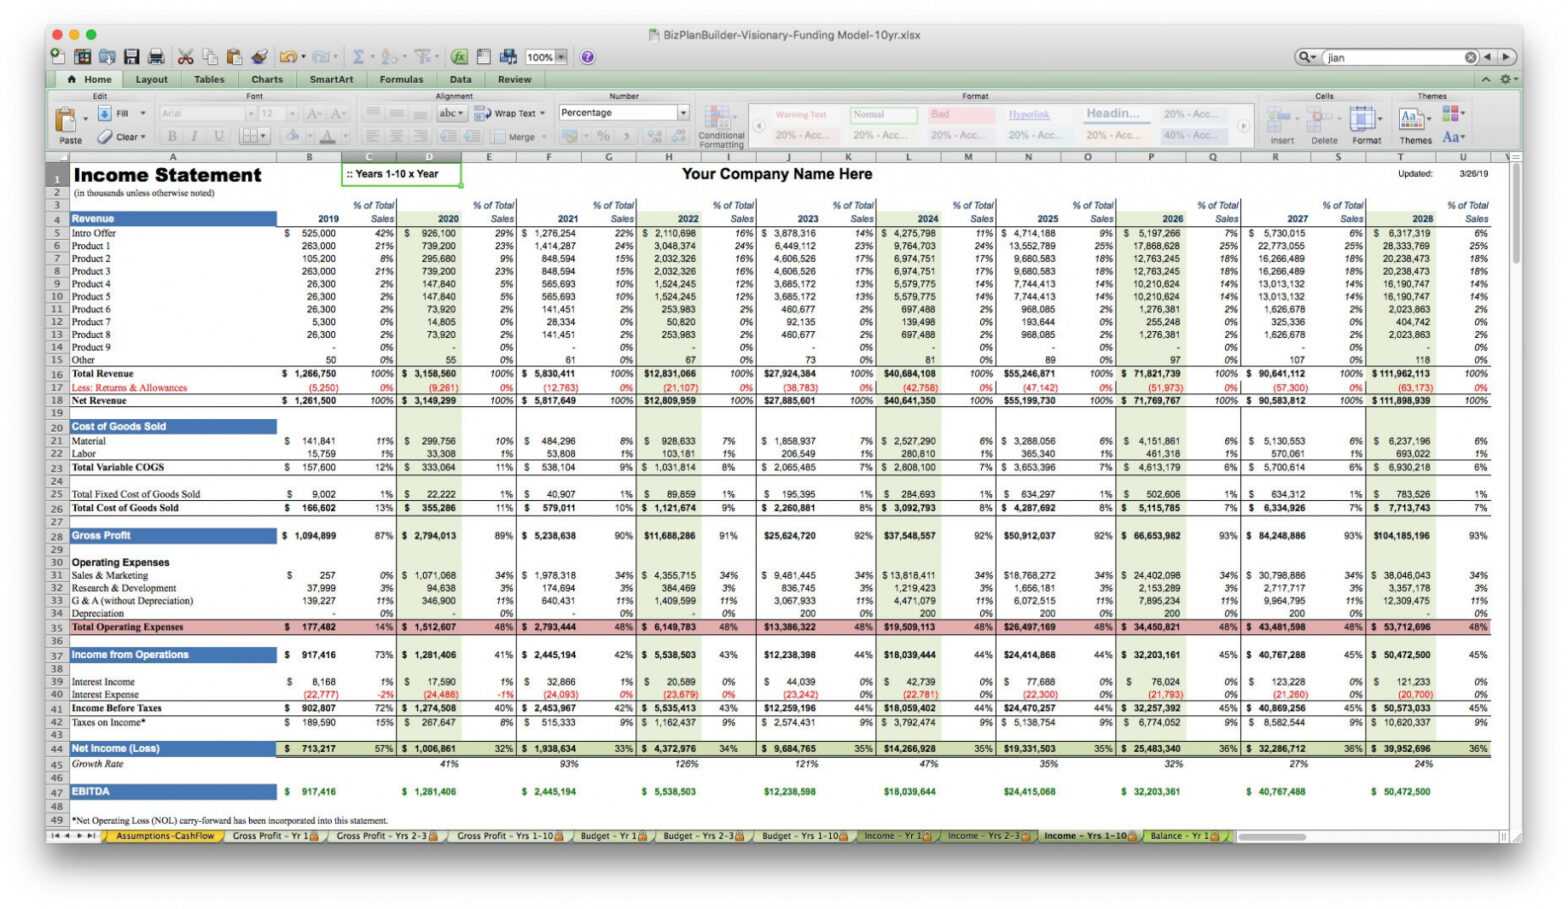 Financial Excel Spreadsheet Forecast Template Business Plan inside Business Forecast Spreadsheet Template